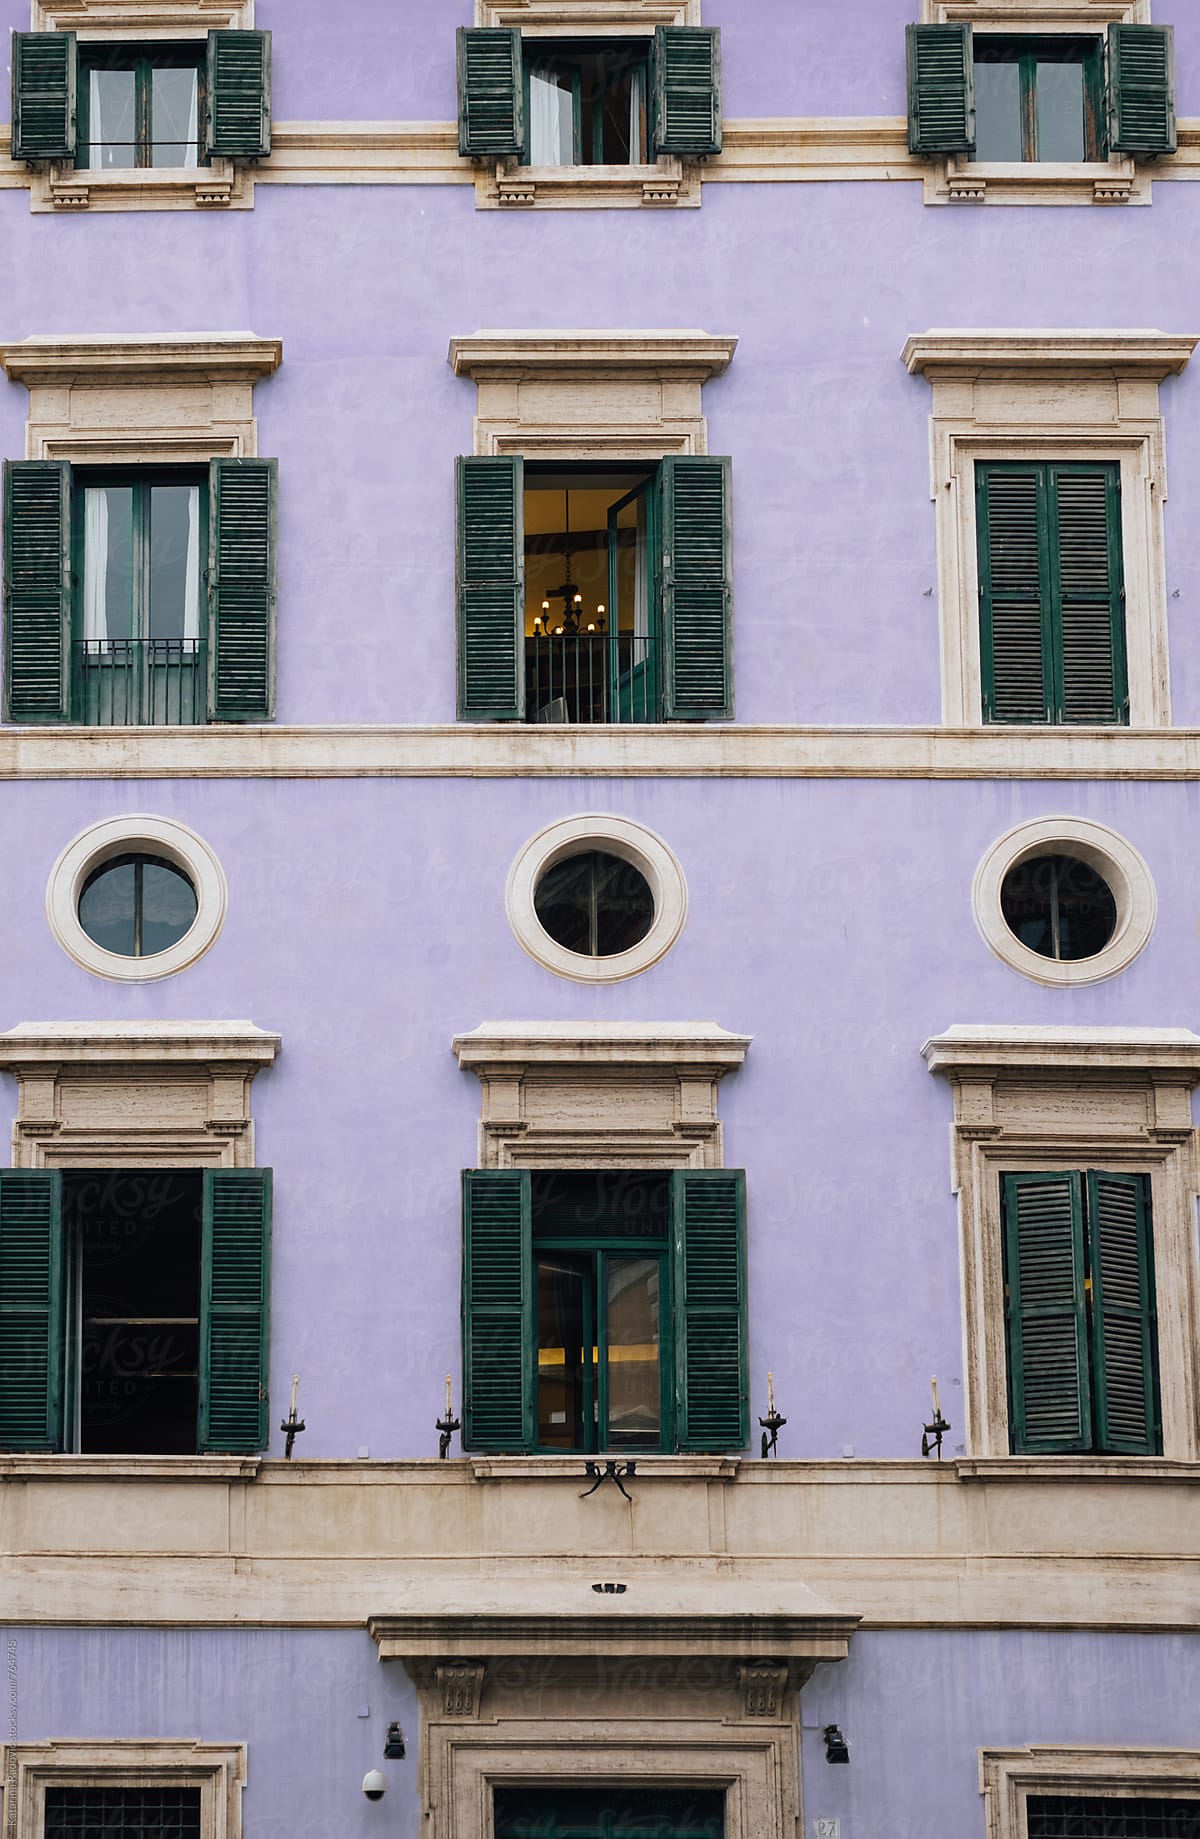 Pastel and Purple Facade of the Old Building